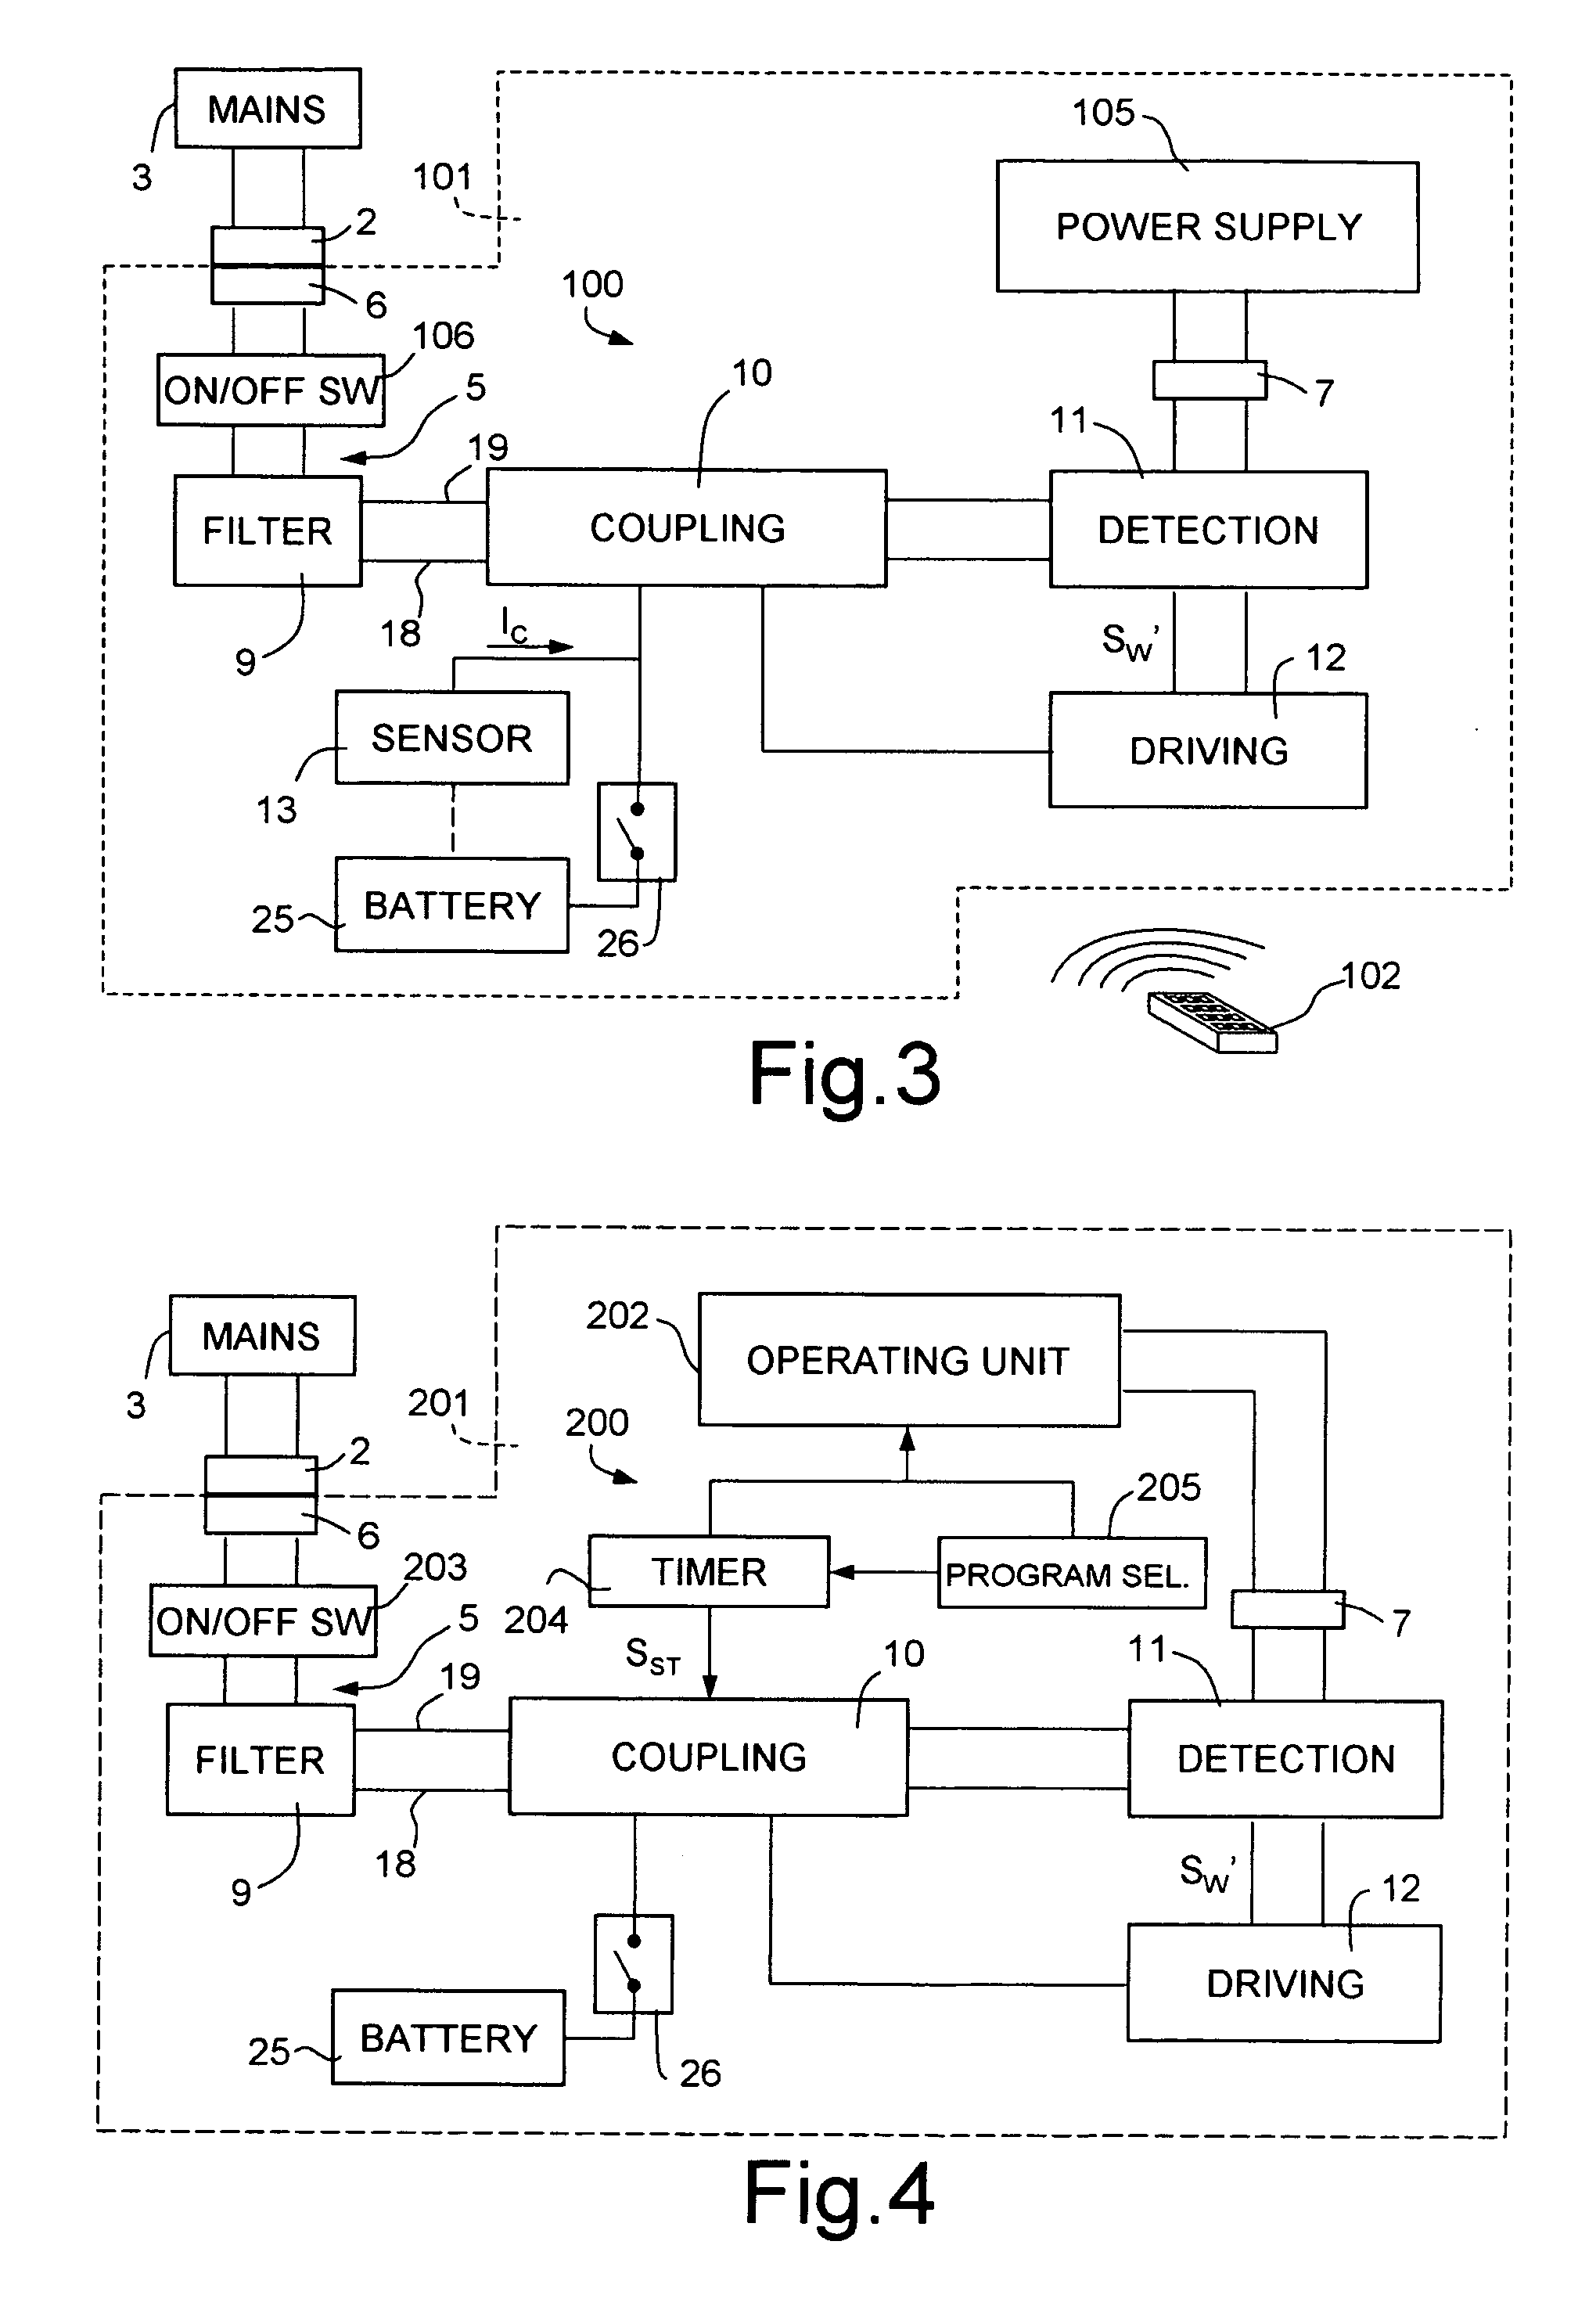 Device for connecting electric household appliances to an electric power main